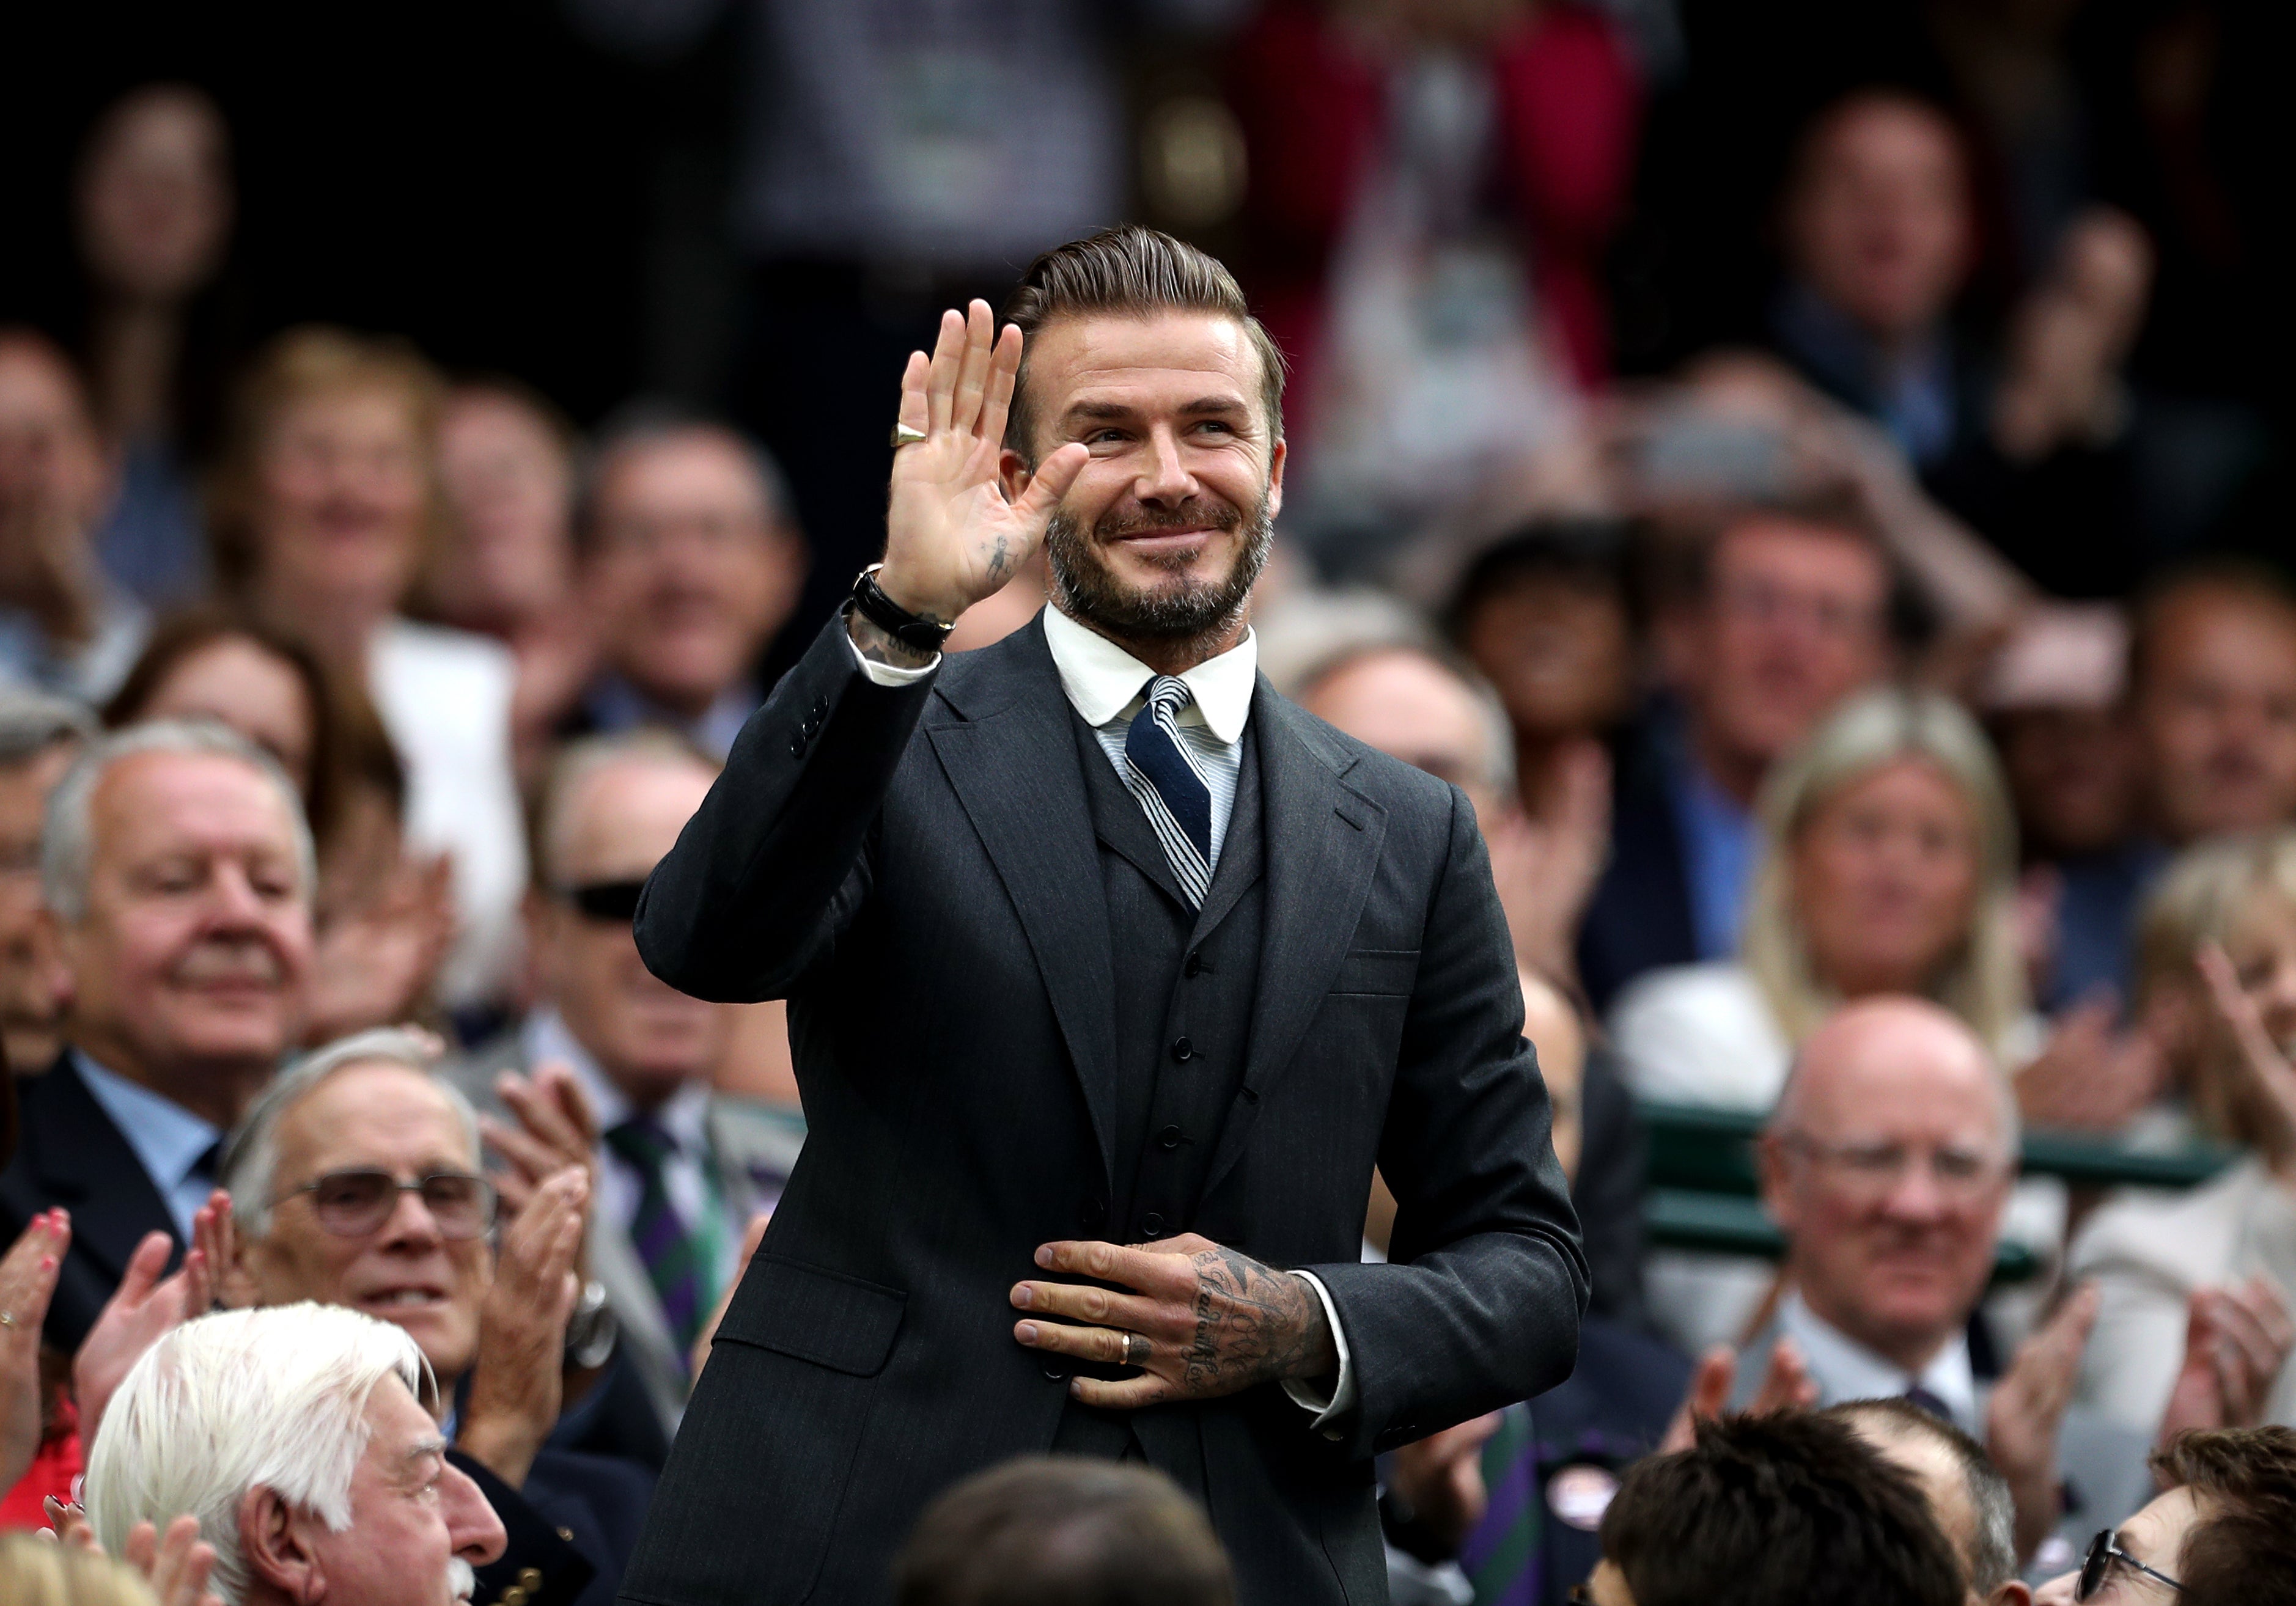 David Beckham on day six of the Wimbledon Championships at the All England Lawn Tennis and Croquet Club, Wimbledon